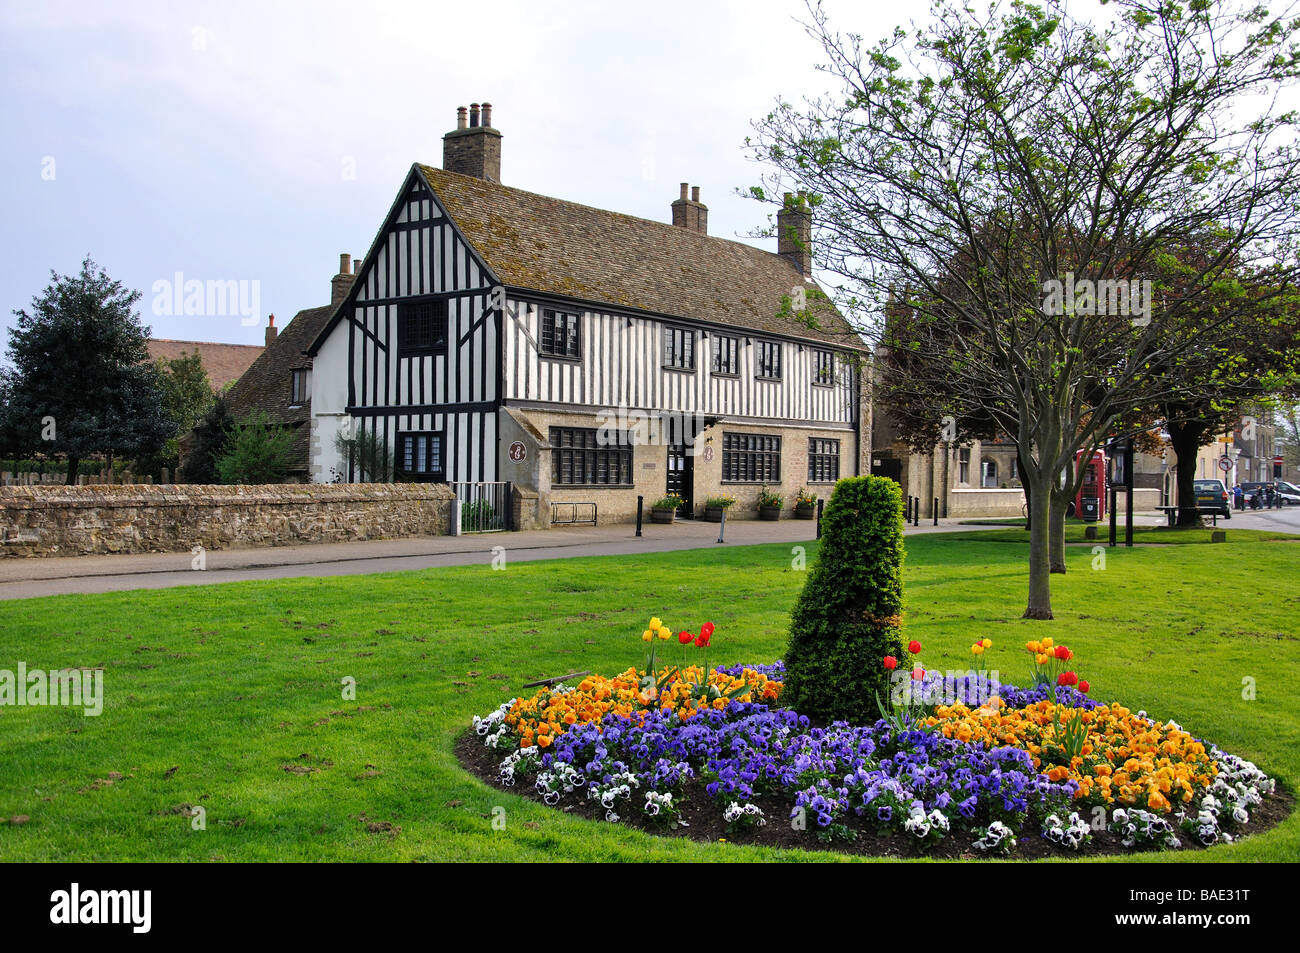 Maison d'Oliver Cromwell Museum, St Mary's Green, Ely, Cambridgeshire, Angleterre, Royaume-Uni Banque D'Images